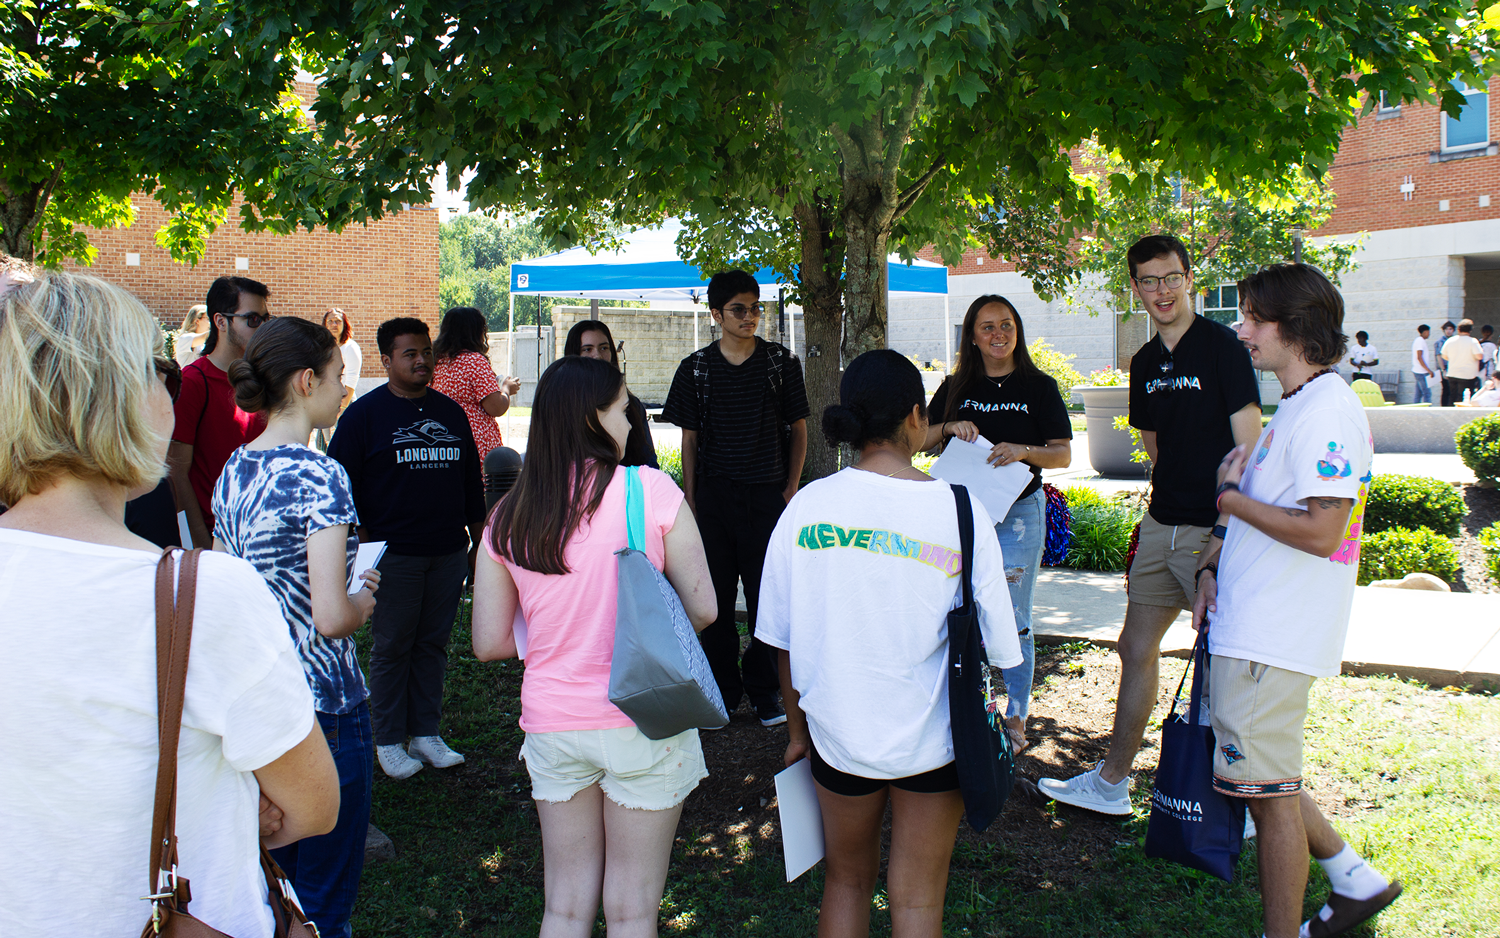 Students listen to an open house tour guide speaking